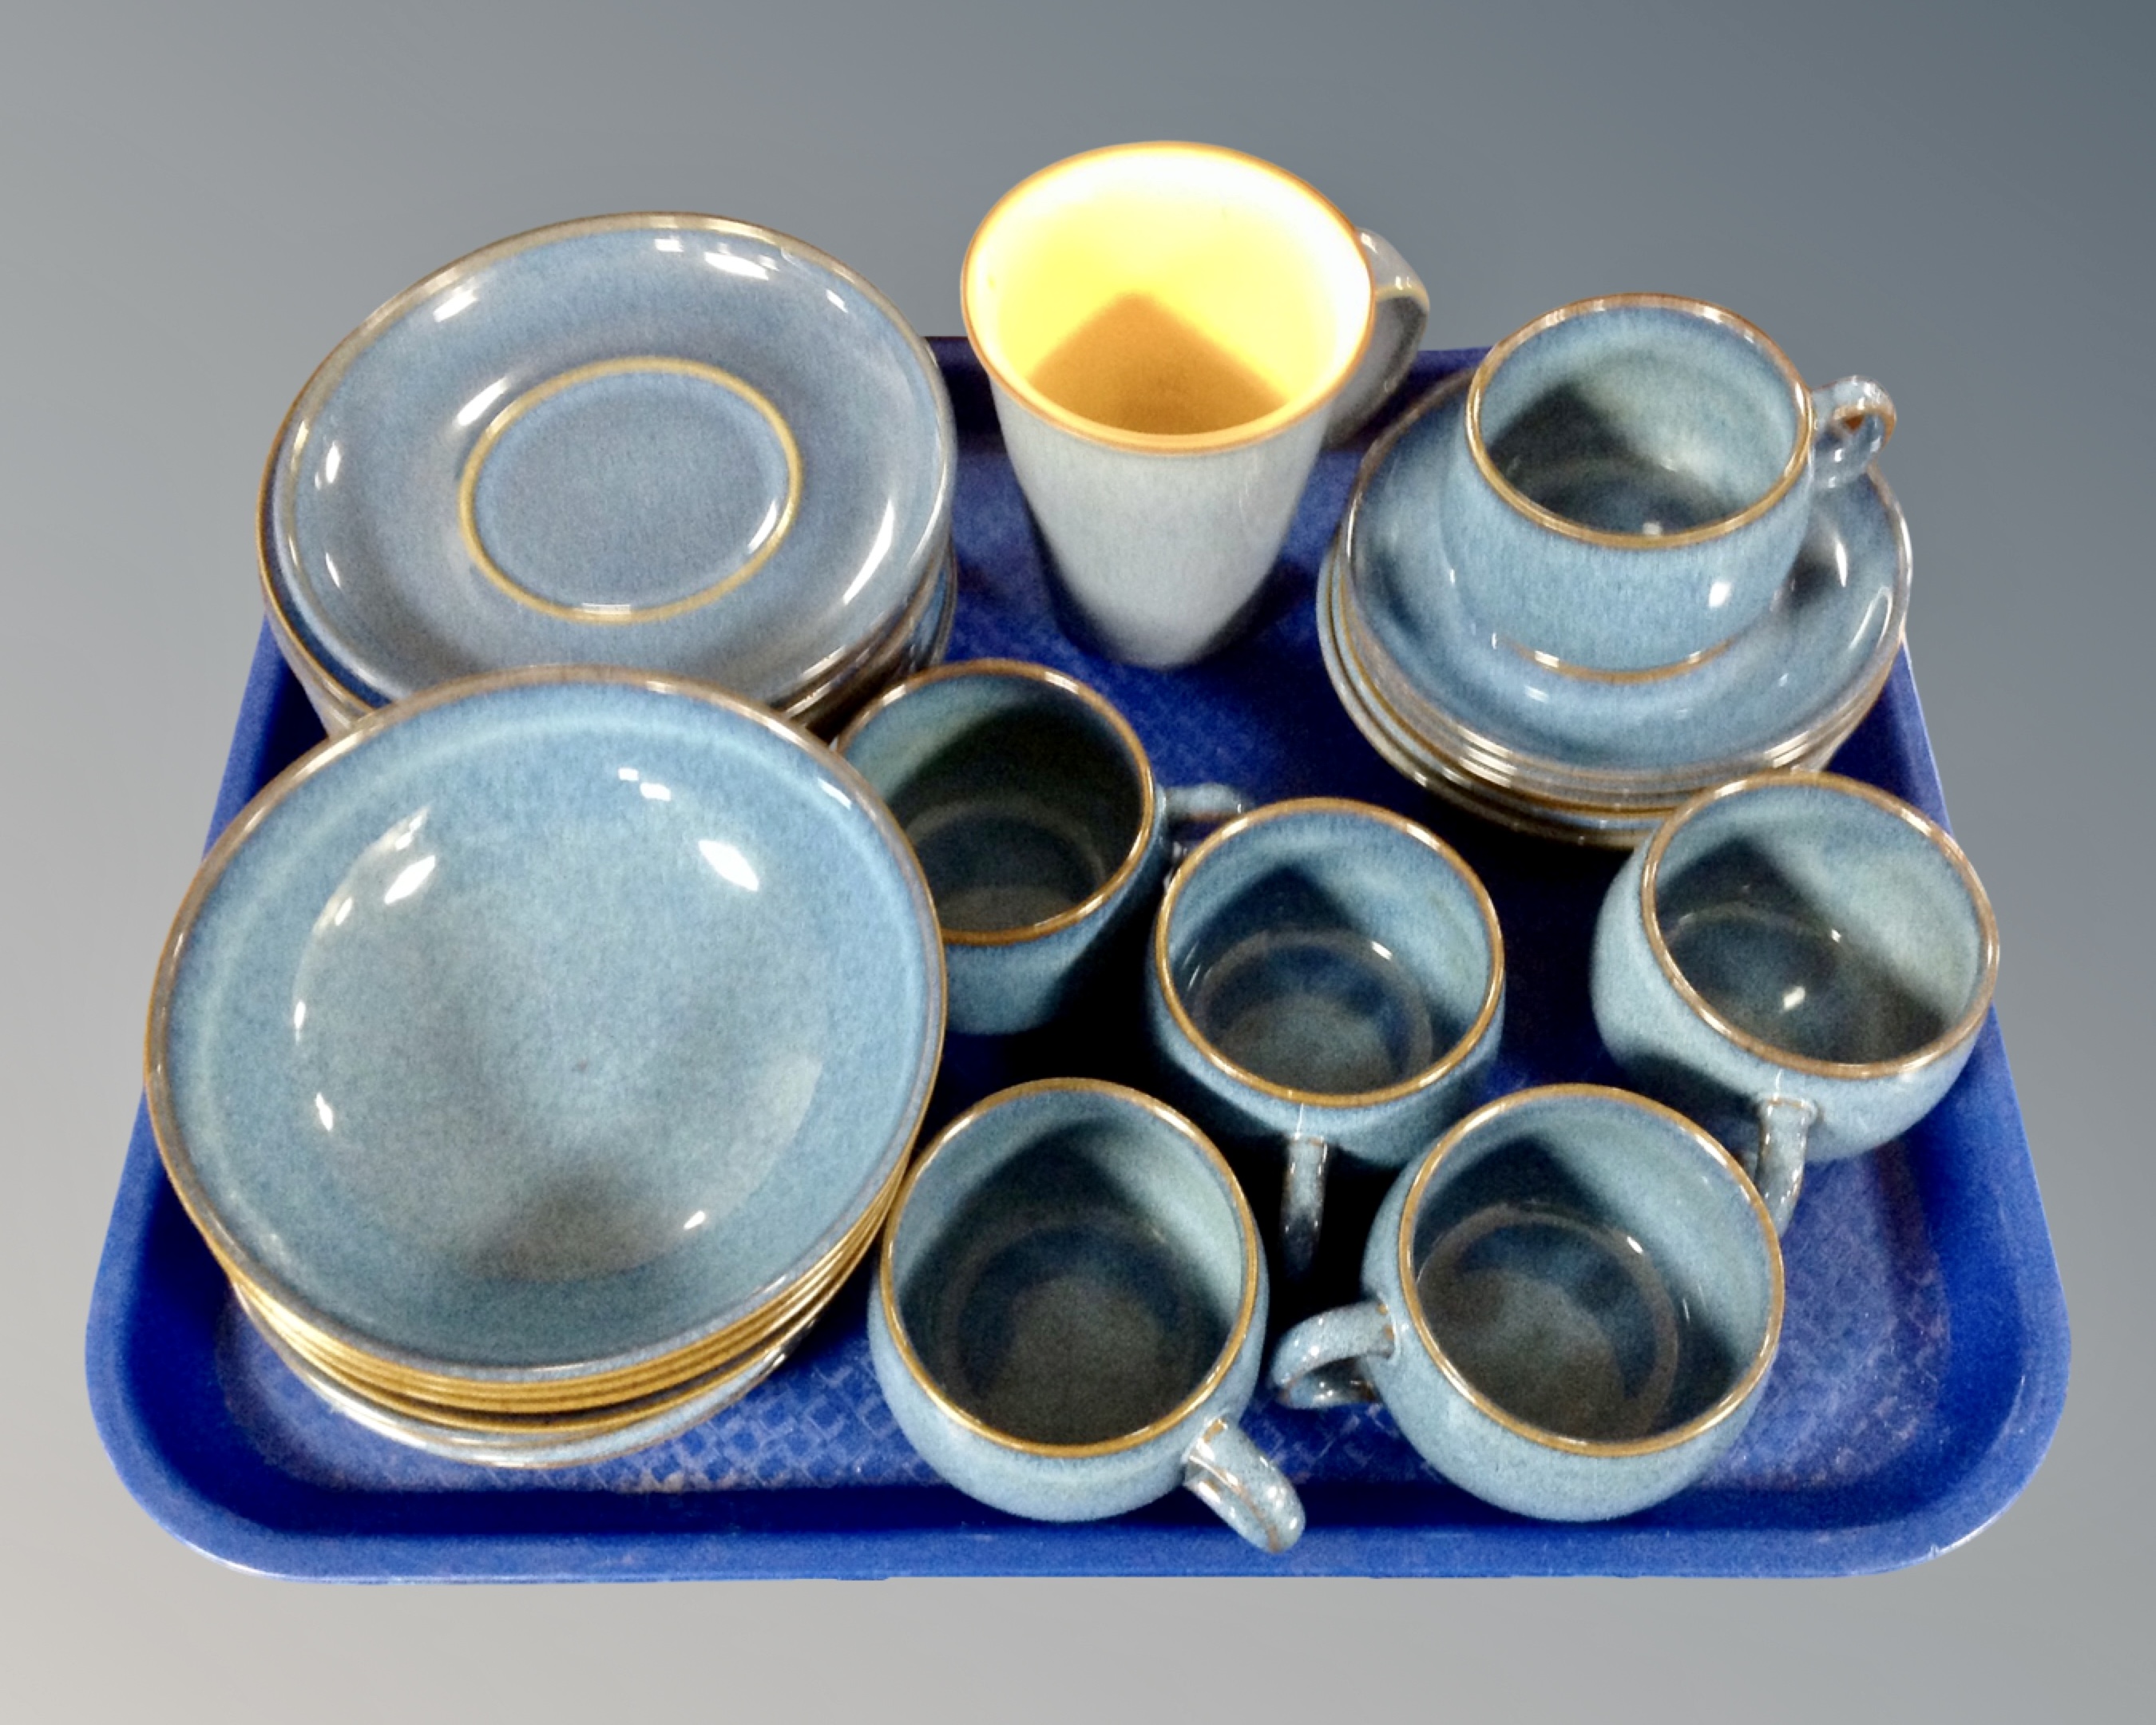 A tray of approximately 27 pieces of Denby blue glazed teacups and dinnerware.